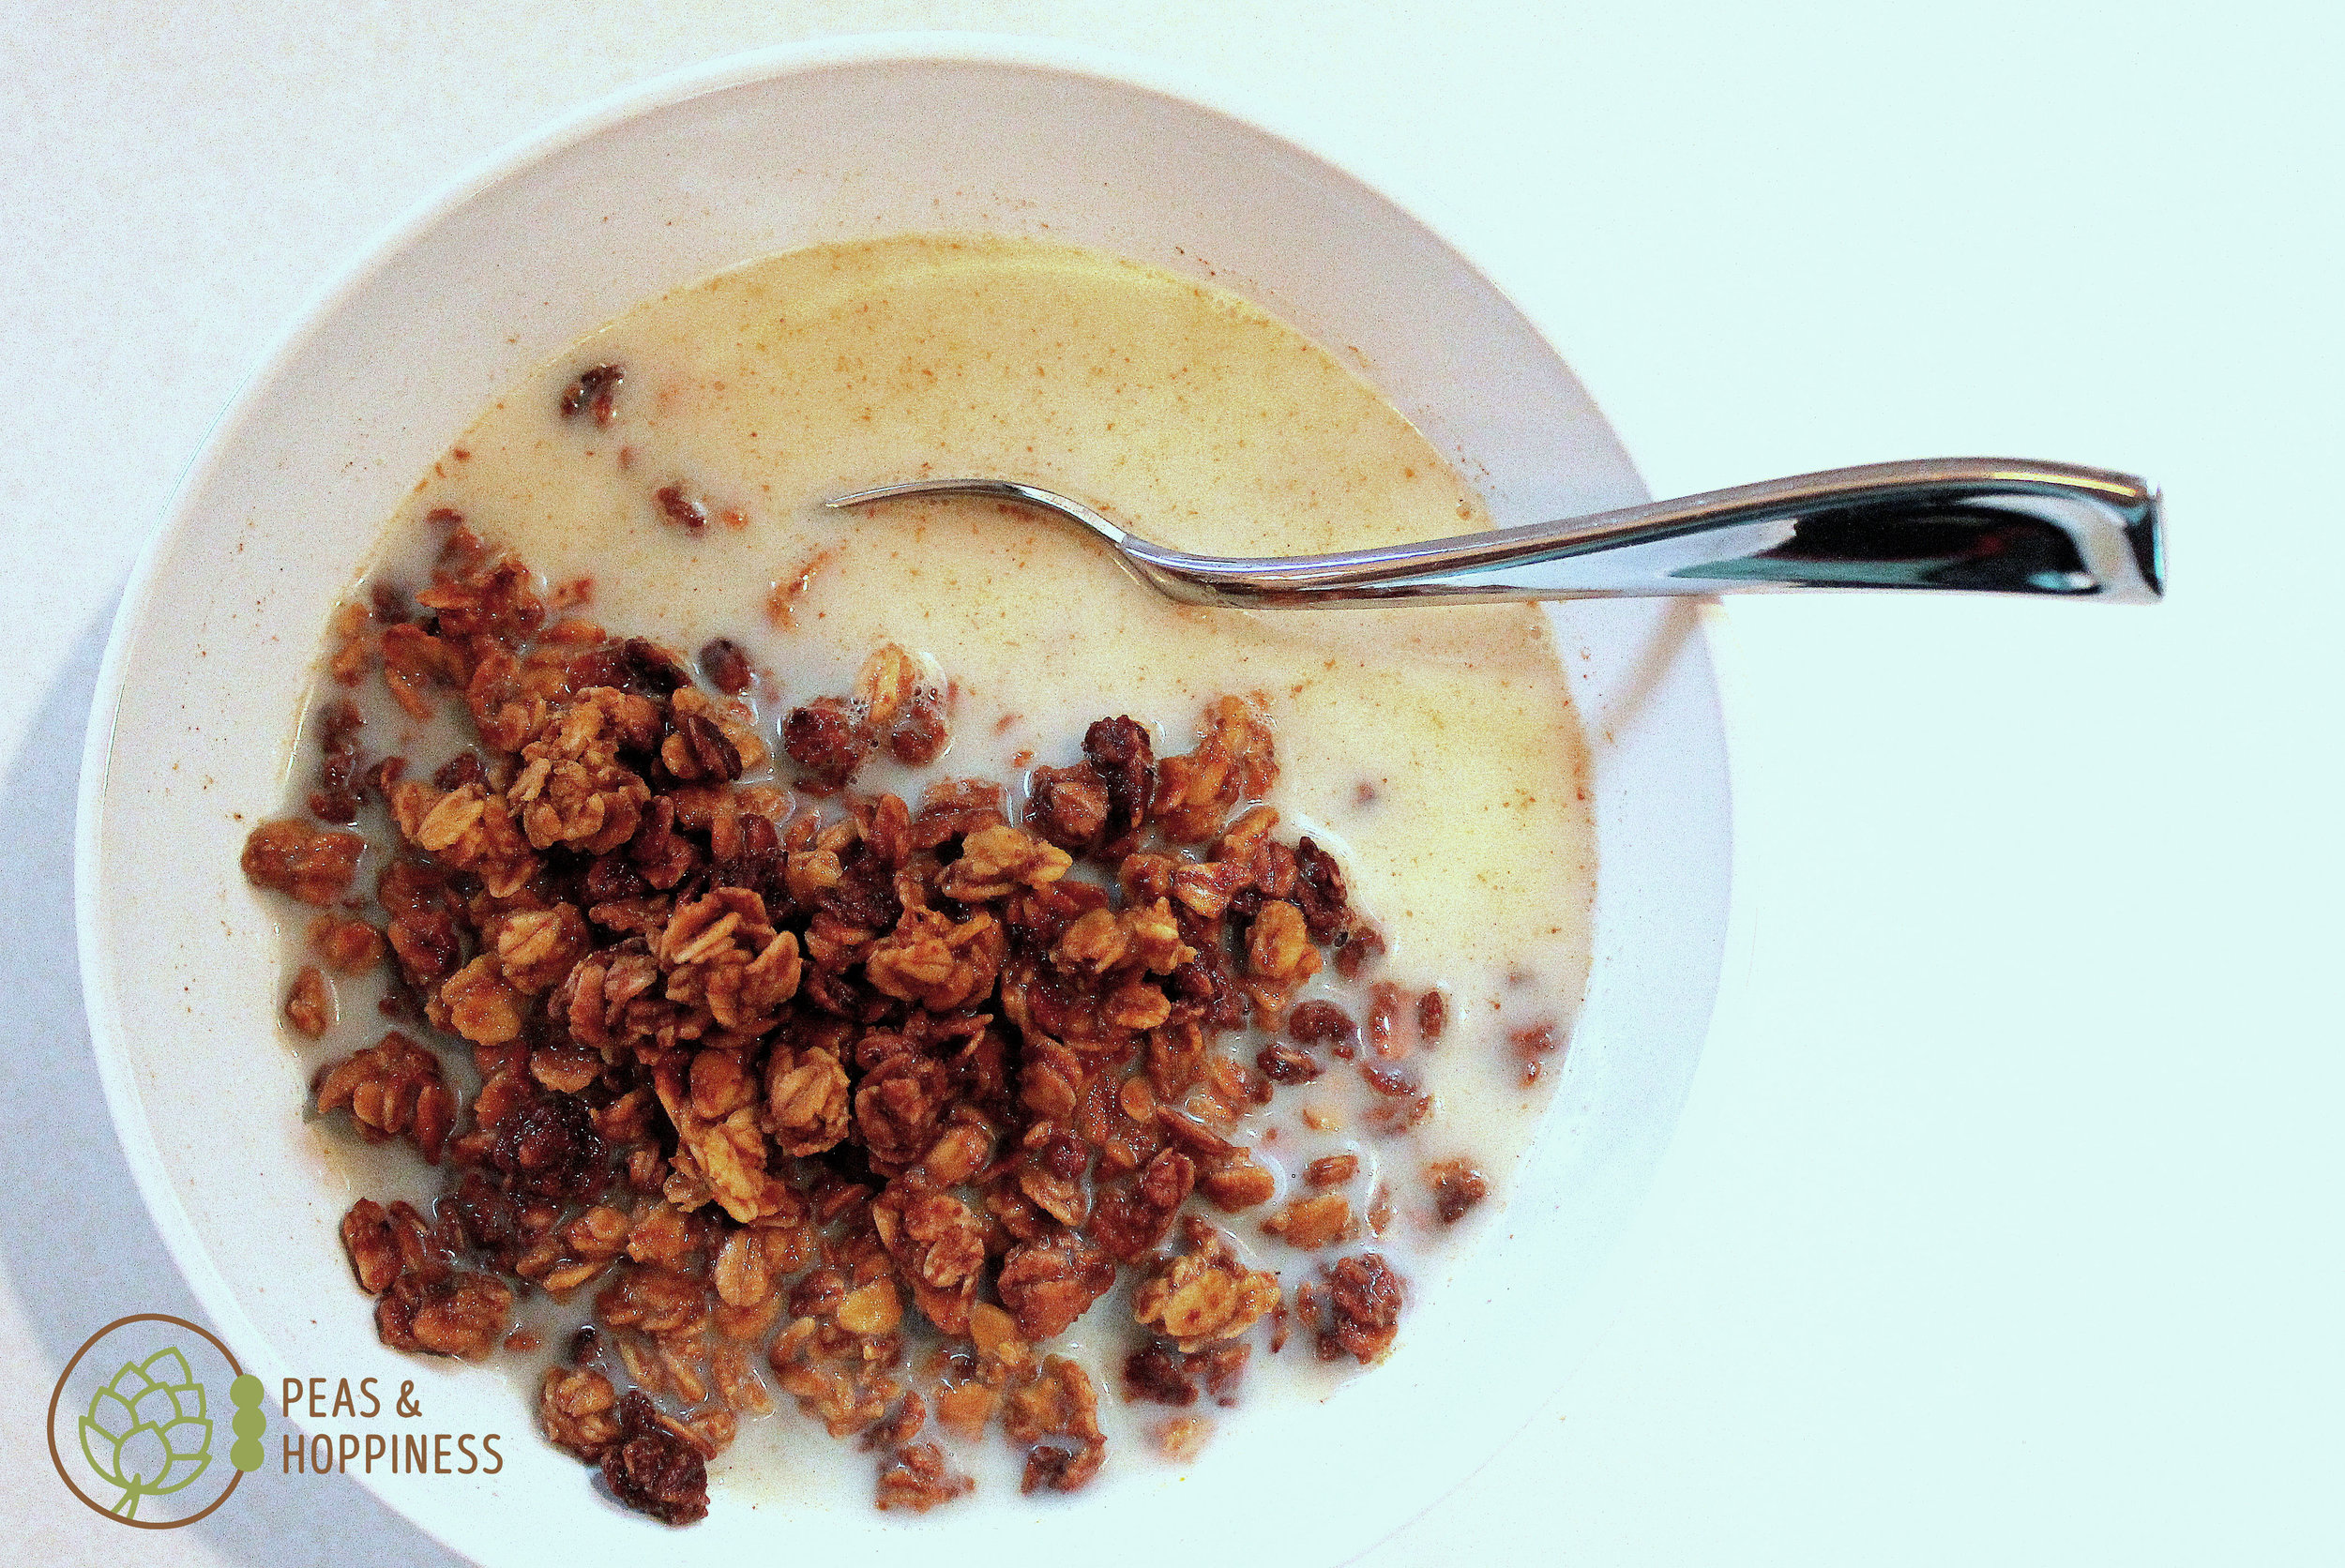 Pumpkin Spice Granola. Throw in sliced almonds for a balanced breakfast! Get the recipe